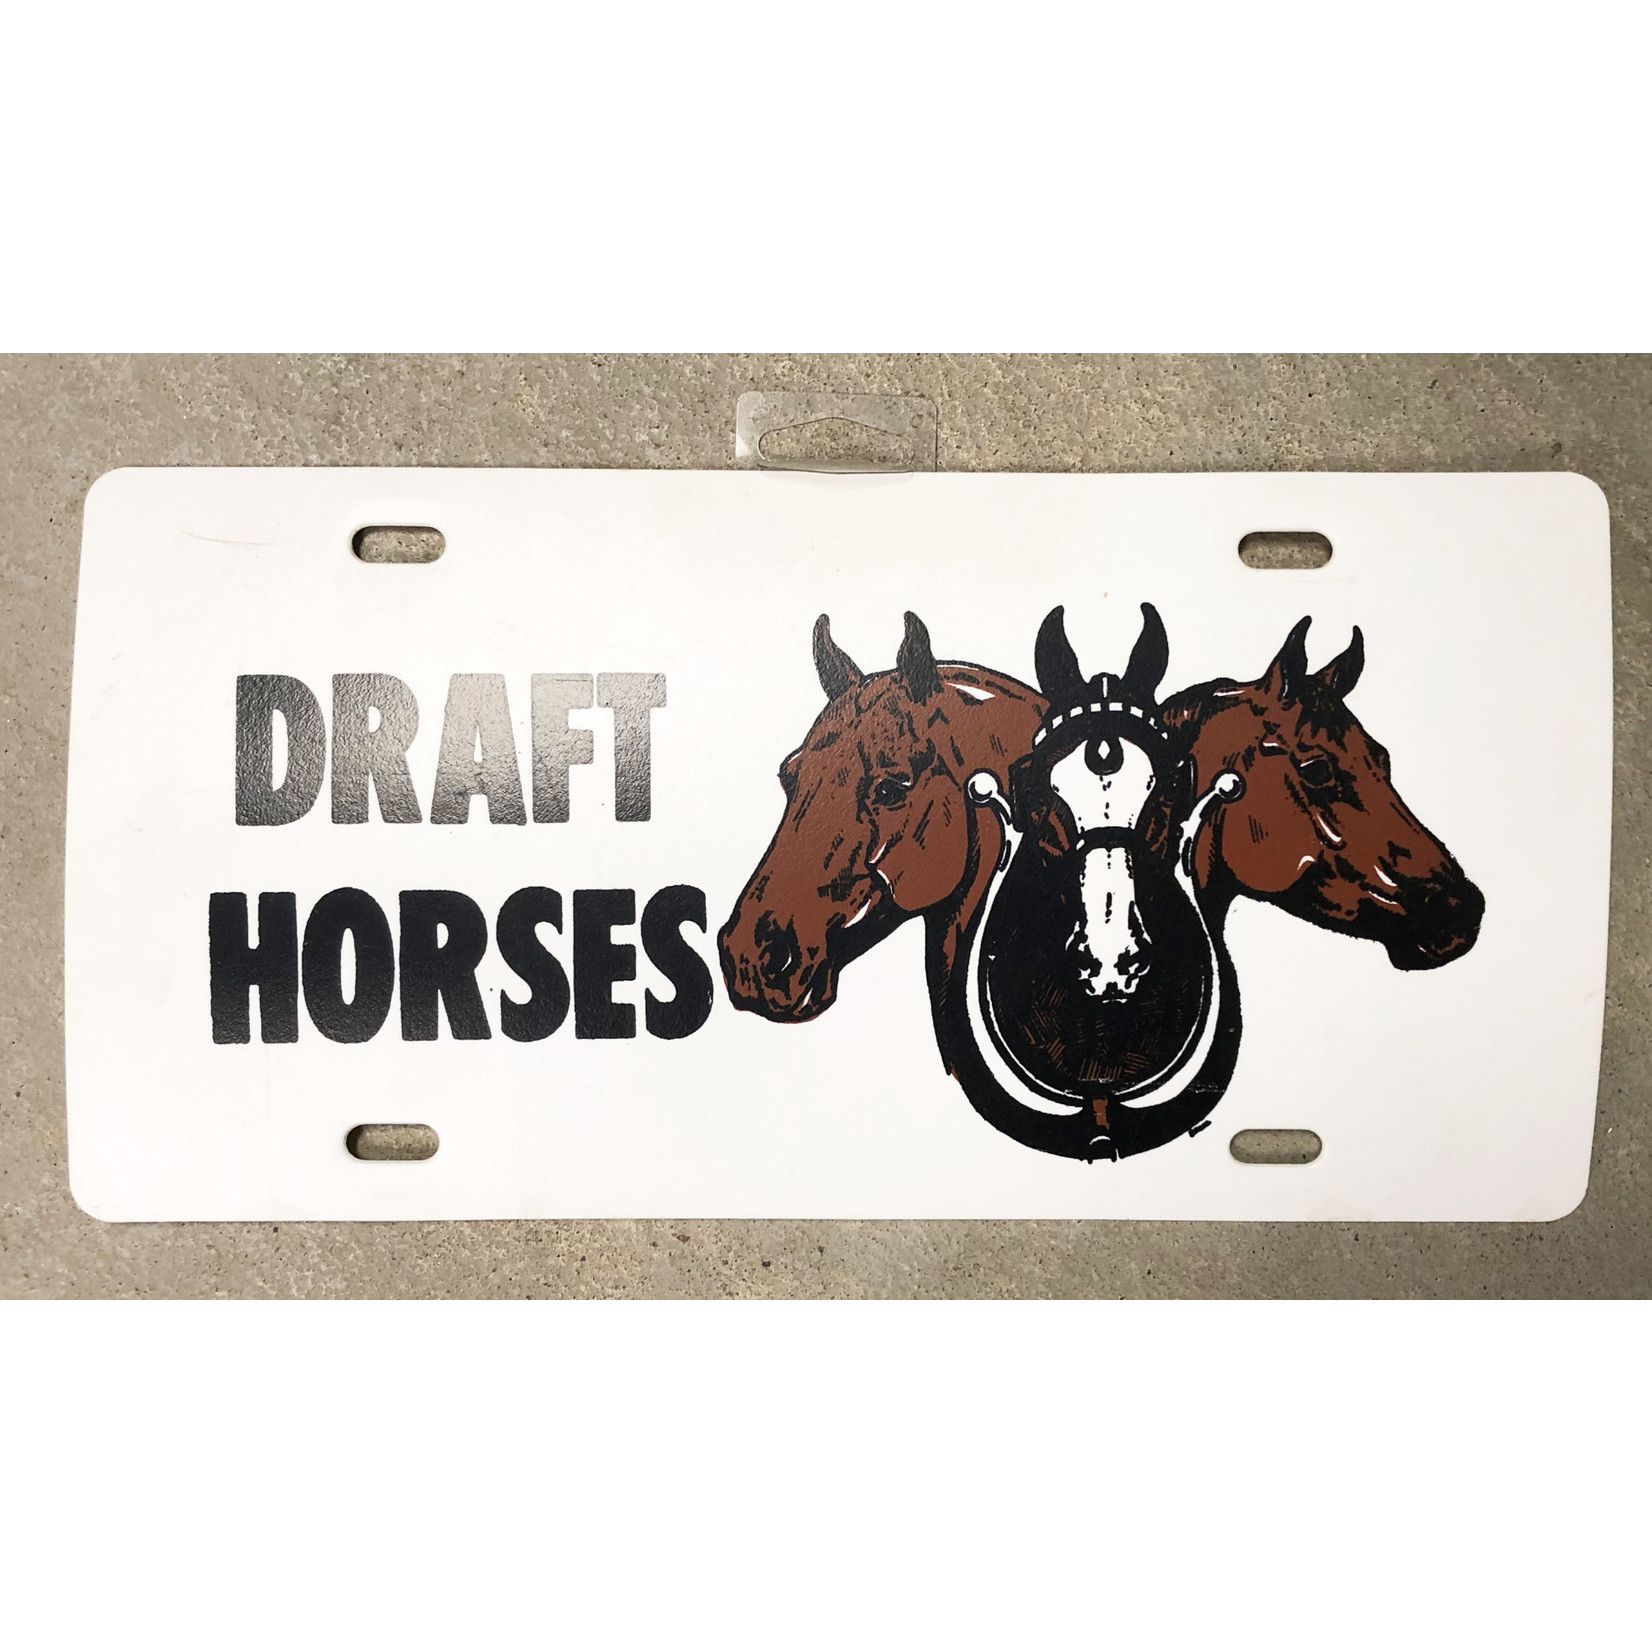 Draft Horses License Plate Space Cover